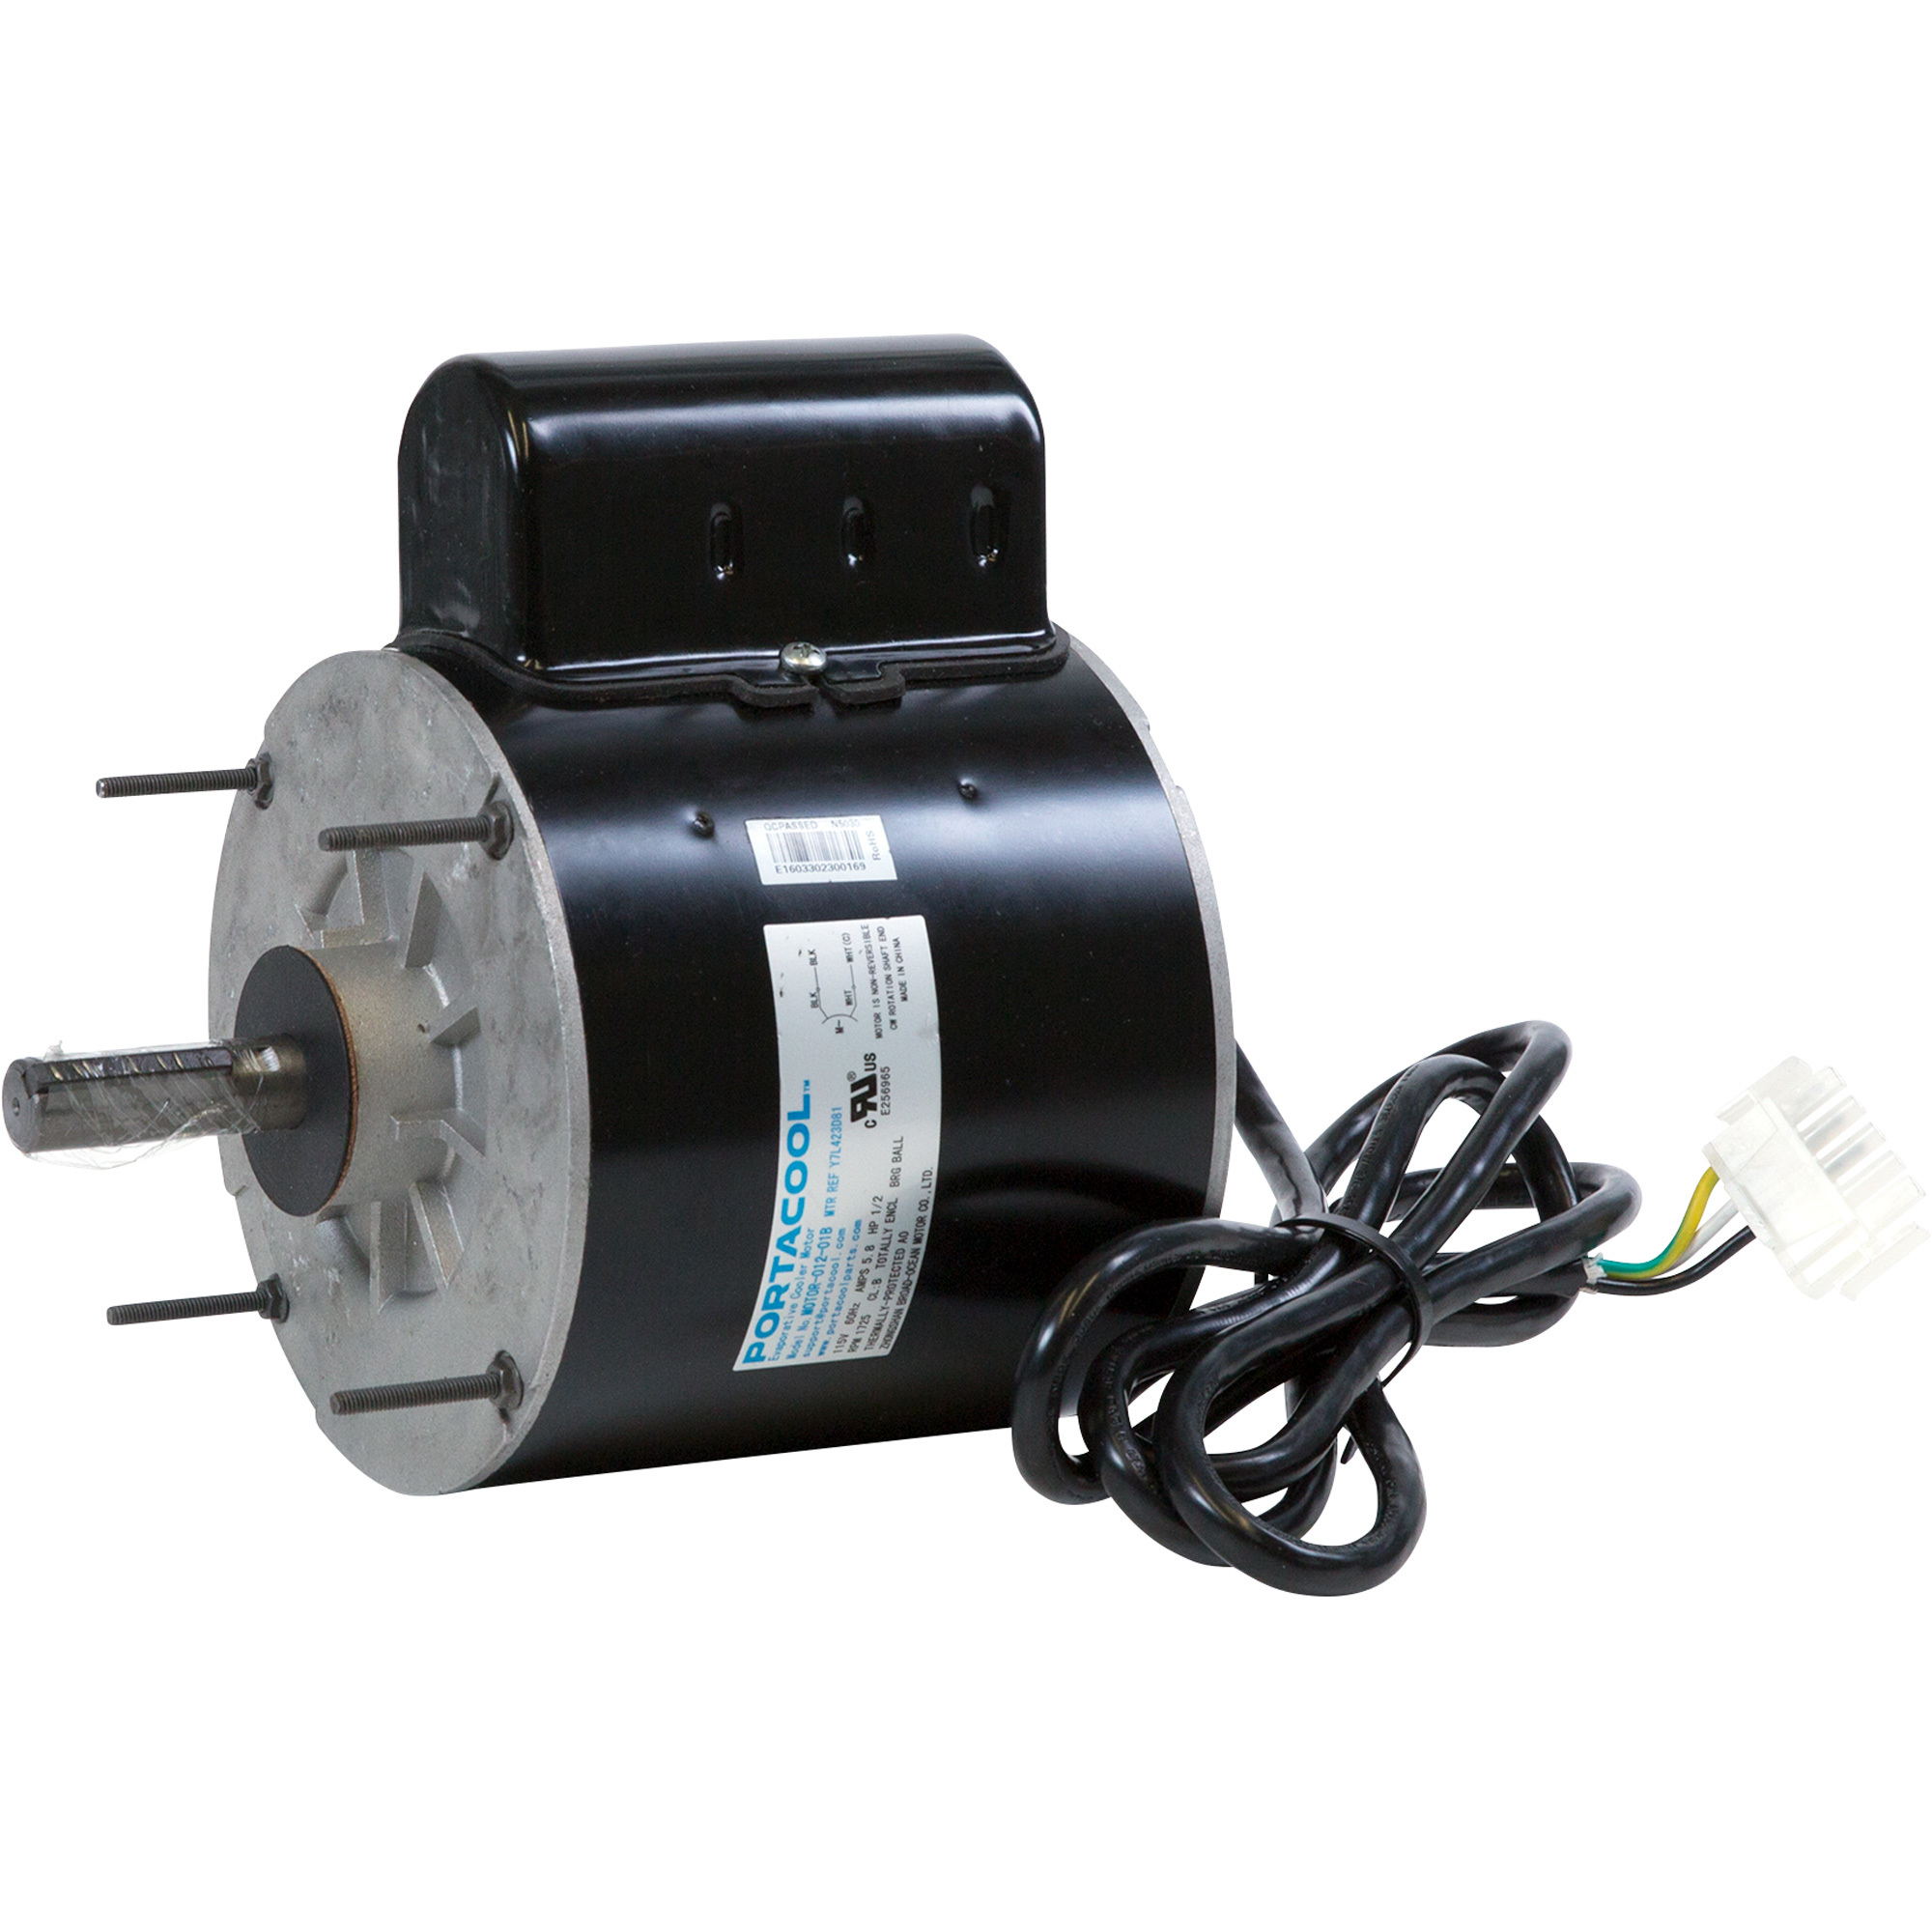 Replacement Motor — Fits Cyclone 160 Evaporative Cooler, Model - Portacool PARMTRCY160A